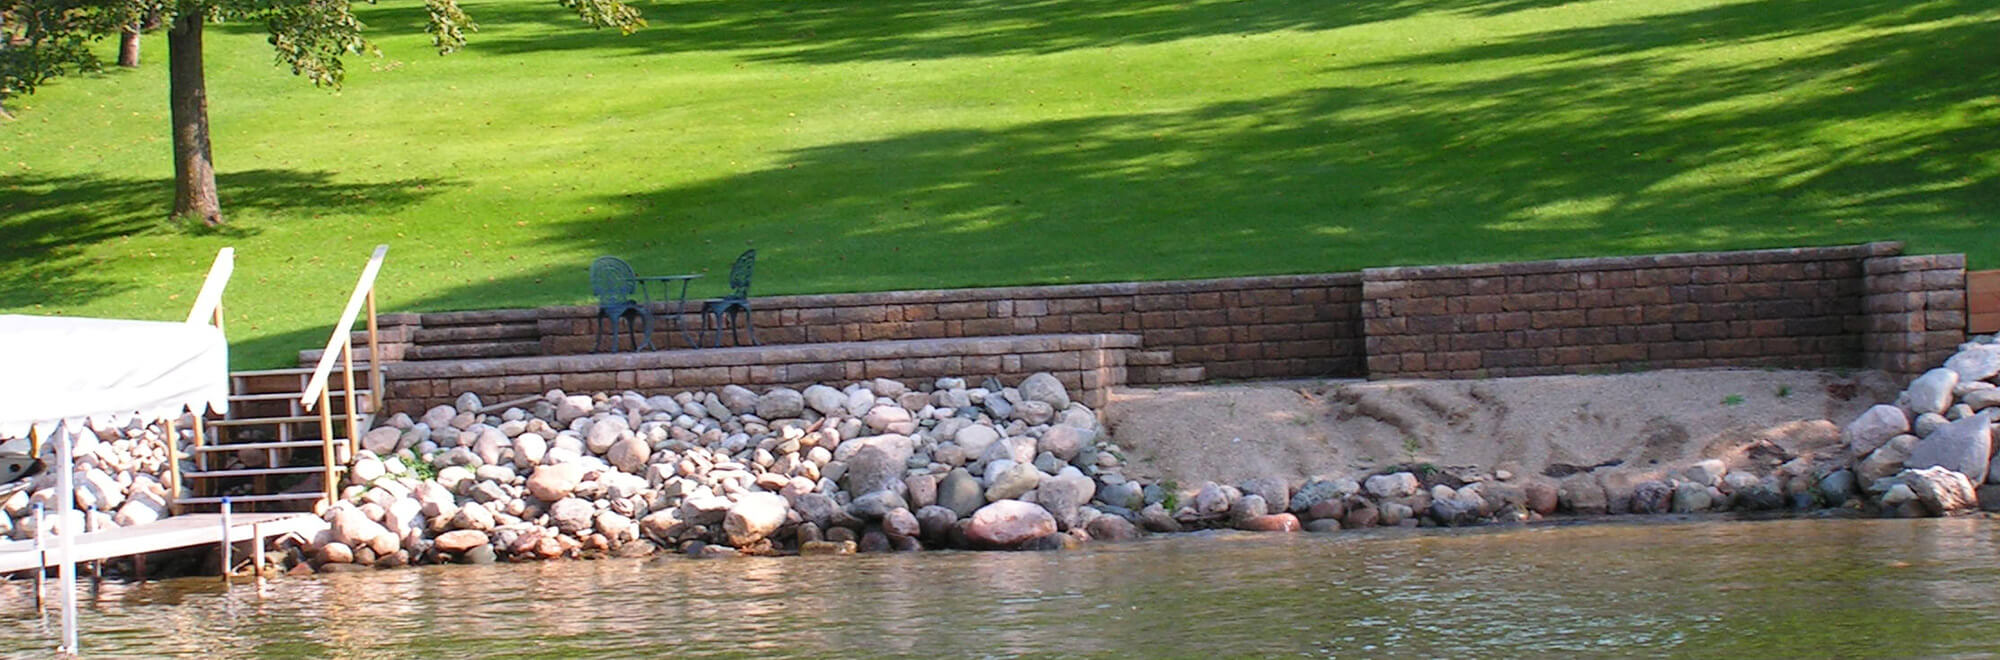 Outdoor living space created along the lakeshore using retaining wall block, patio pavers, boulders, and beach sand